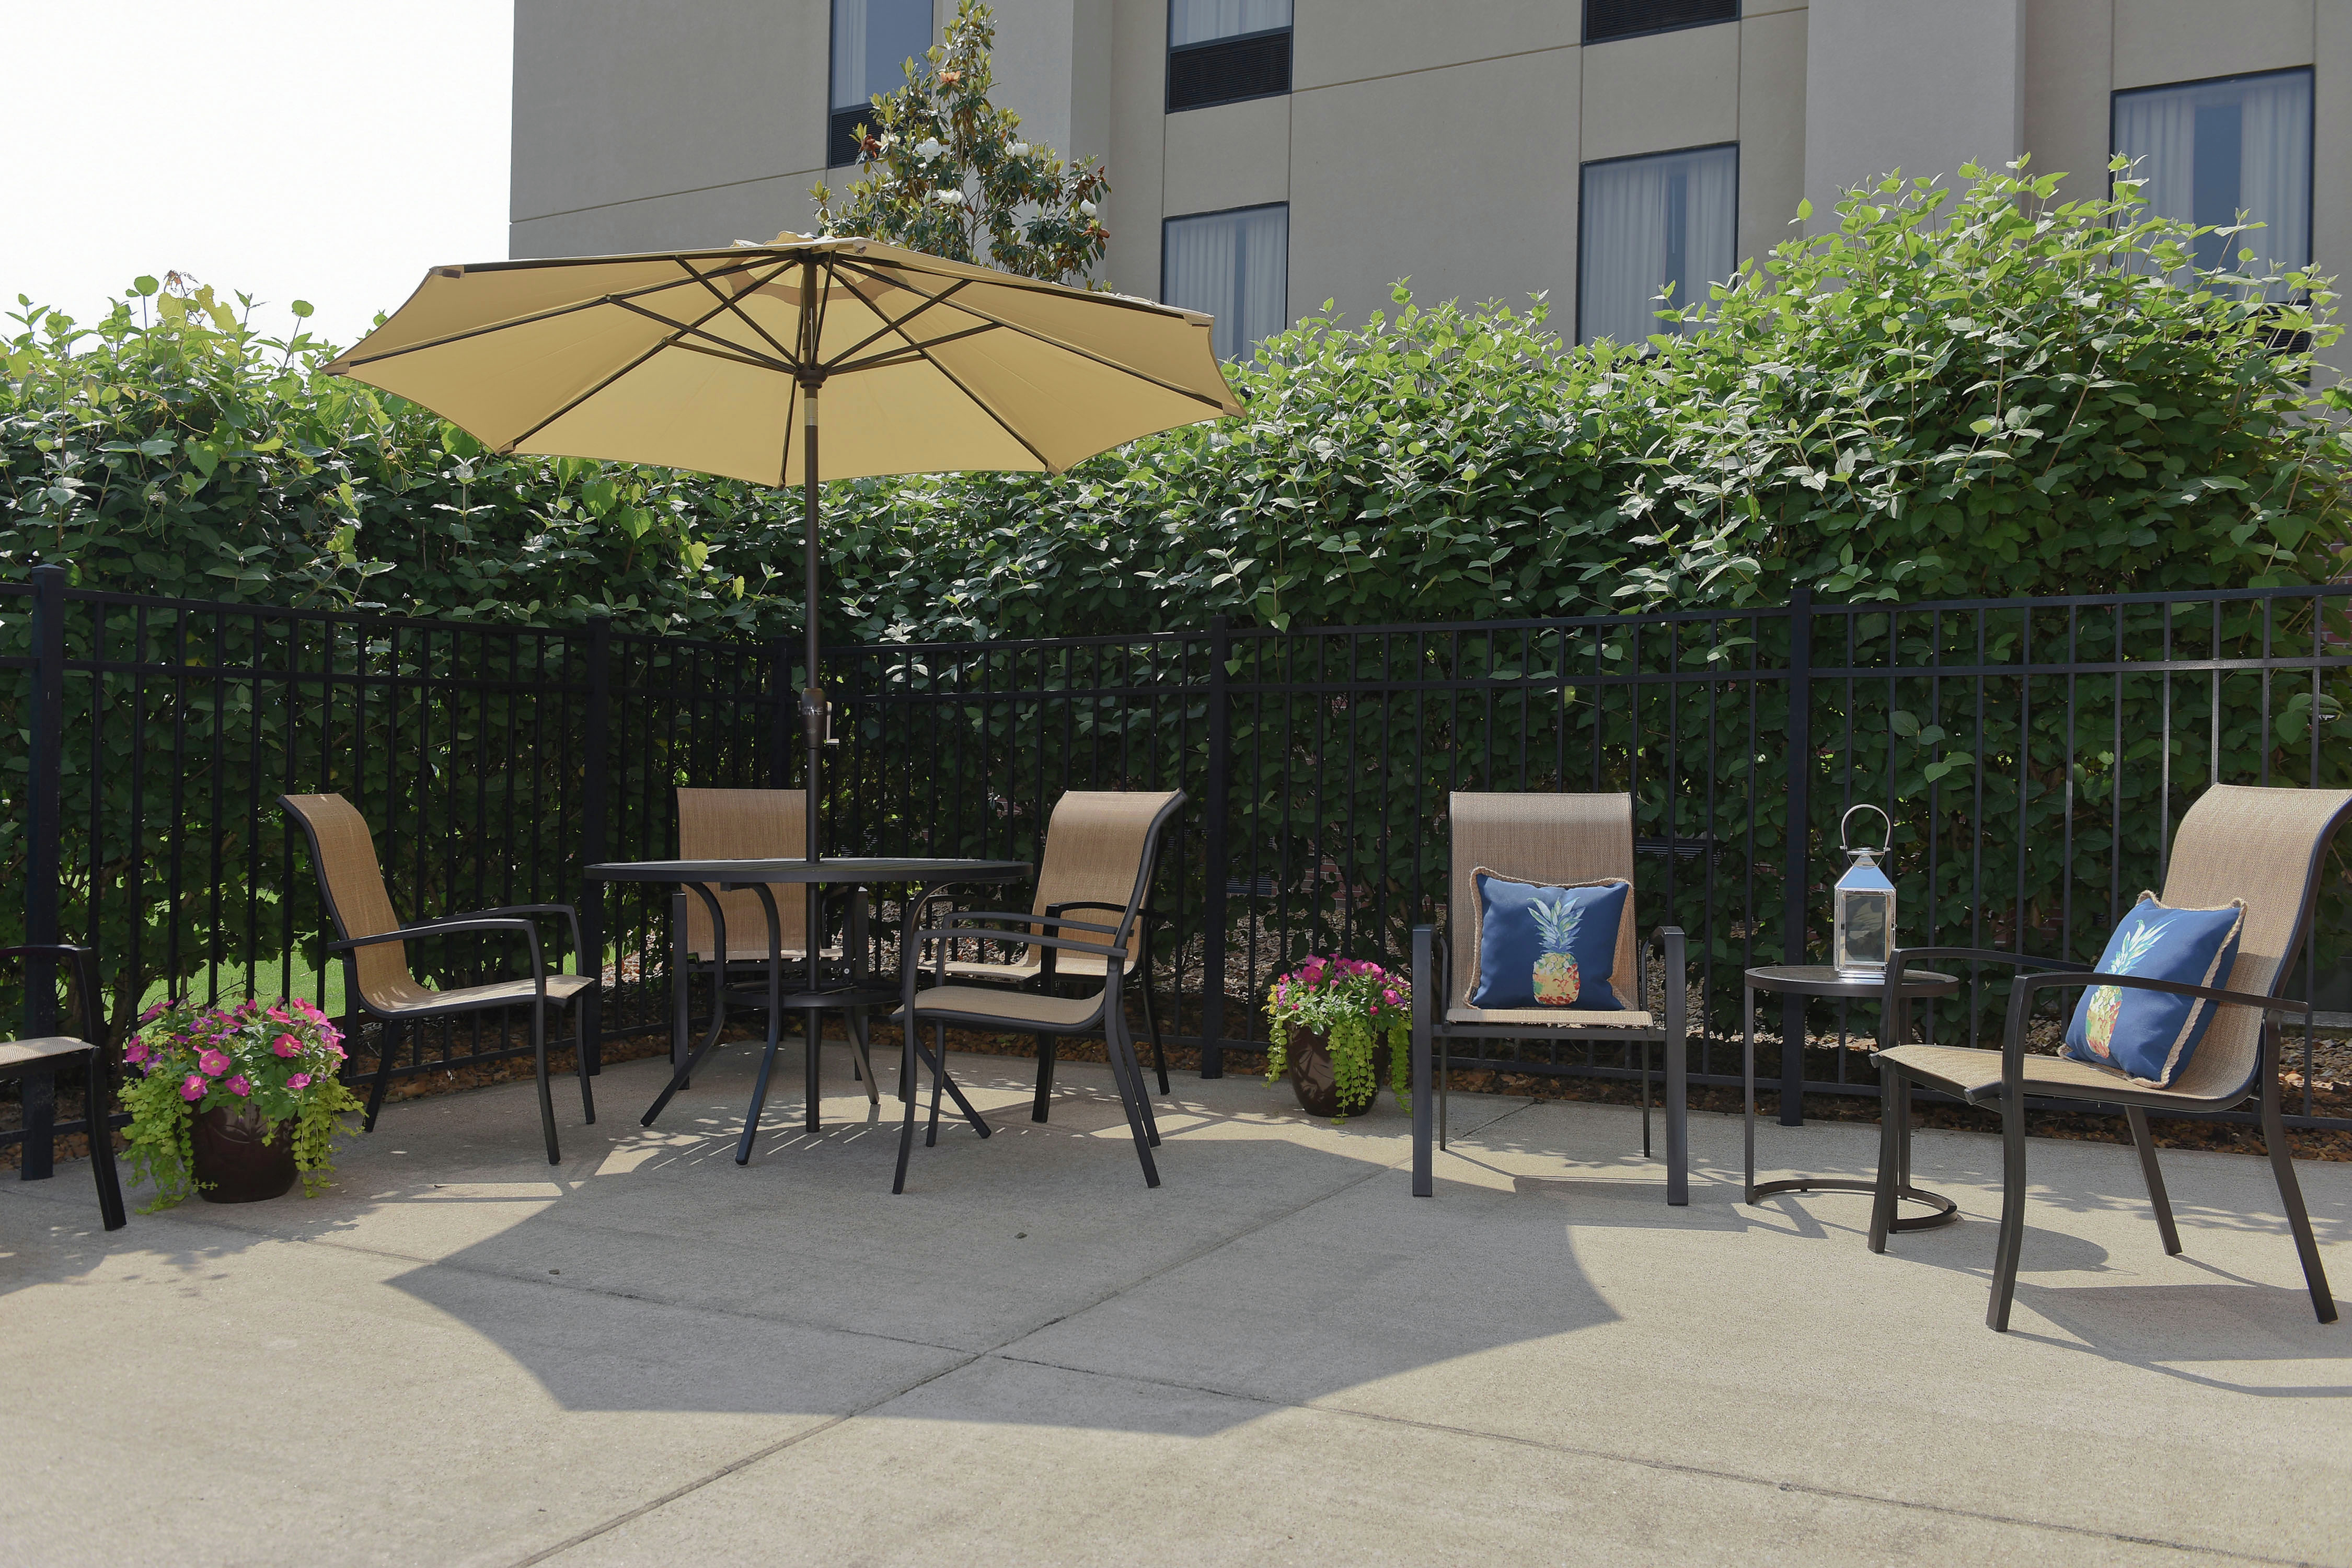 Soak up the sun on our Patio.